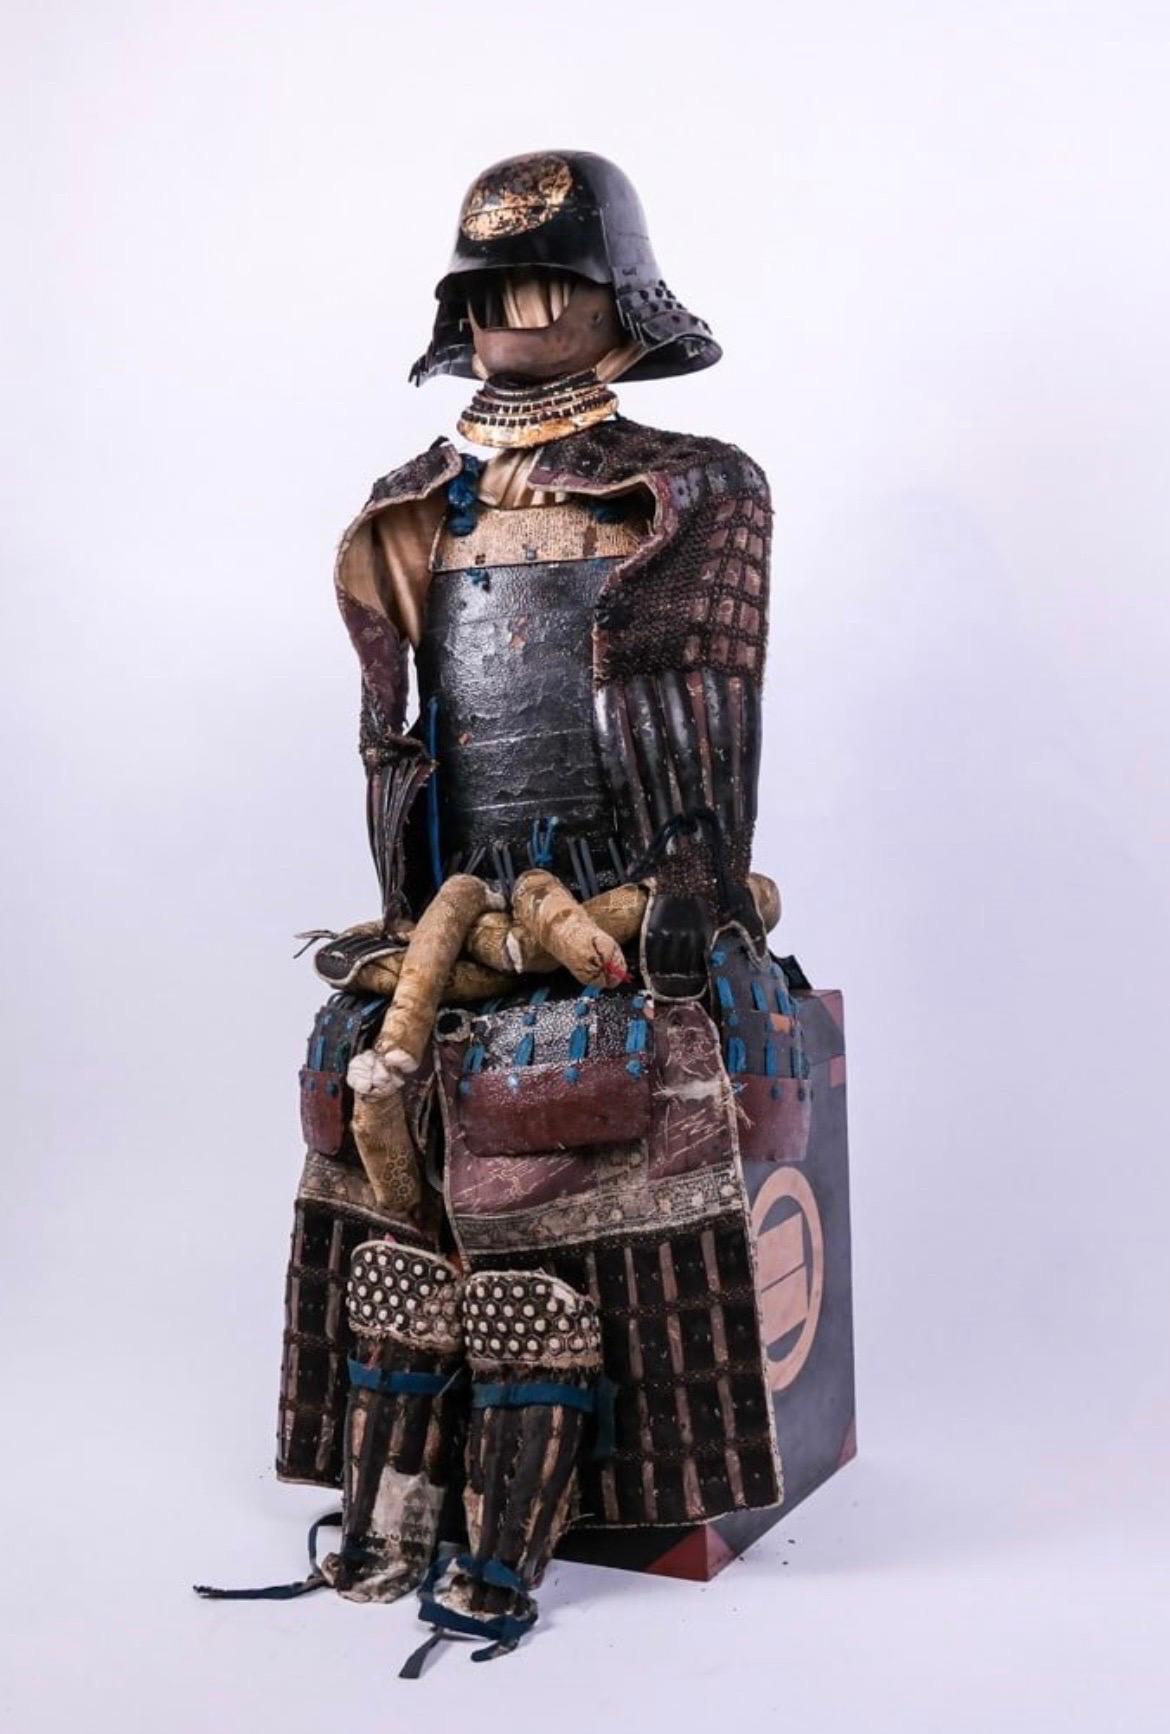 Japanese, Edo Period (1603-1868), likely late 18th century. 

Step into the rich tapestry of Japanese history with this exquisite 18th-century Edo Period Lacquer & Chain Mail Suit of Armor, a masterpiece that seamlessly blends martial craftsmanship